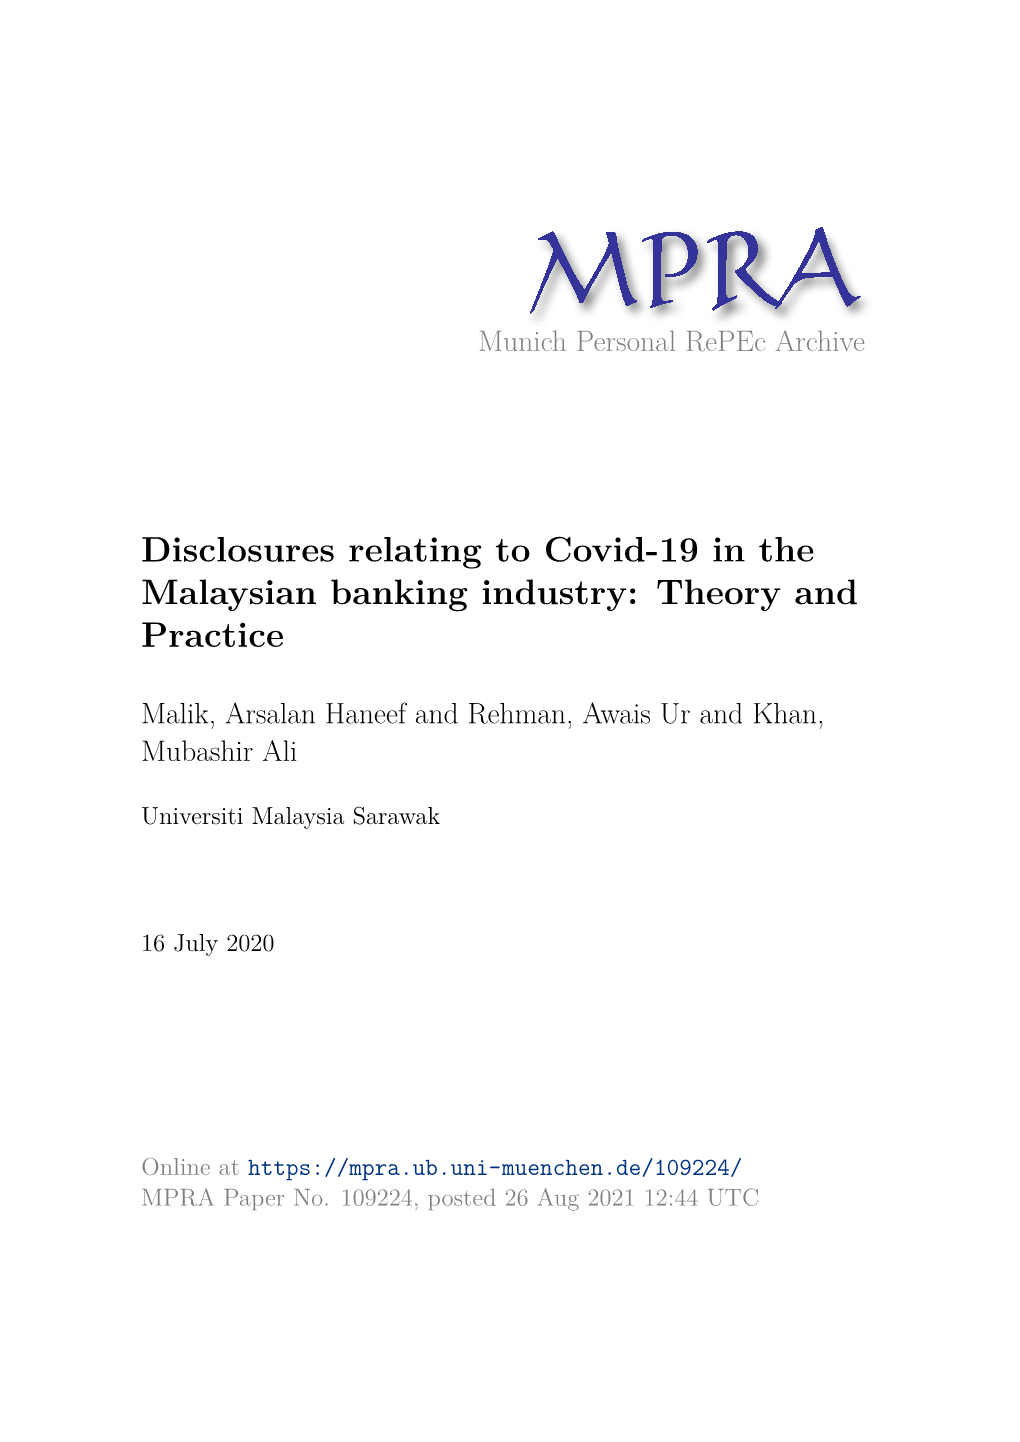 Disclosures Relating to Covid-19 in the Malaysian Banking Industry: Theory and Practice